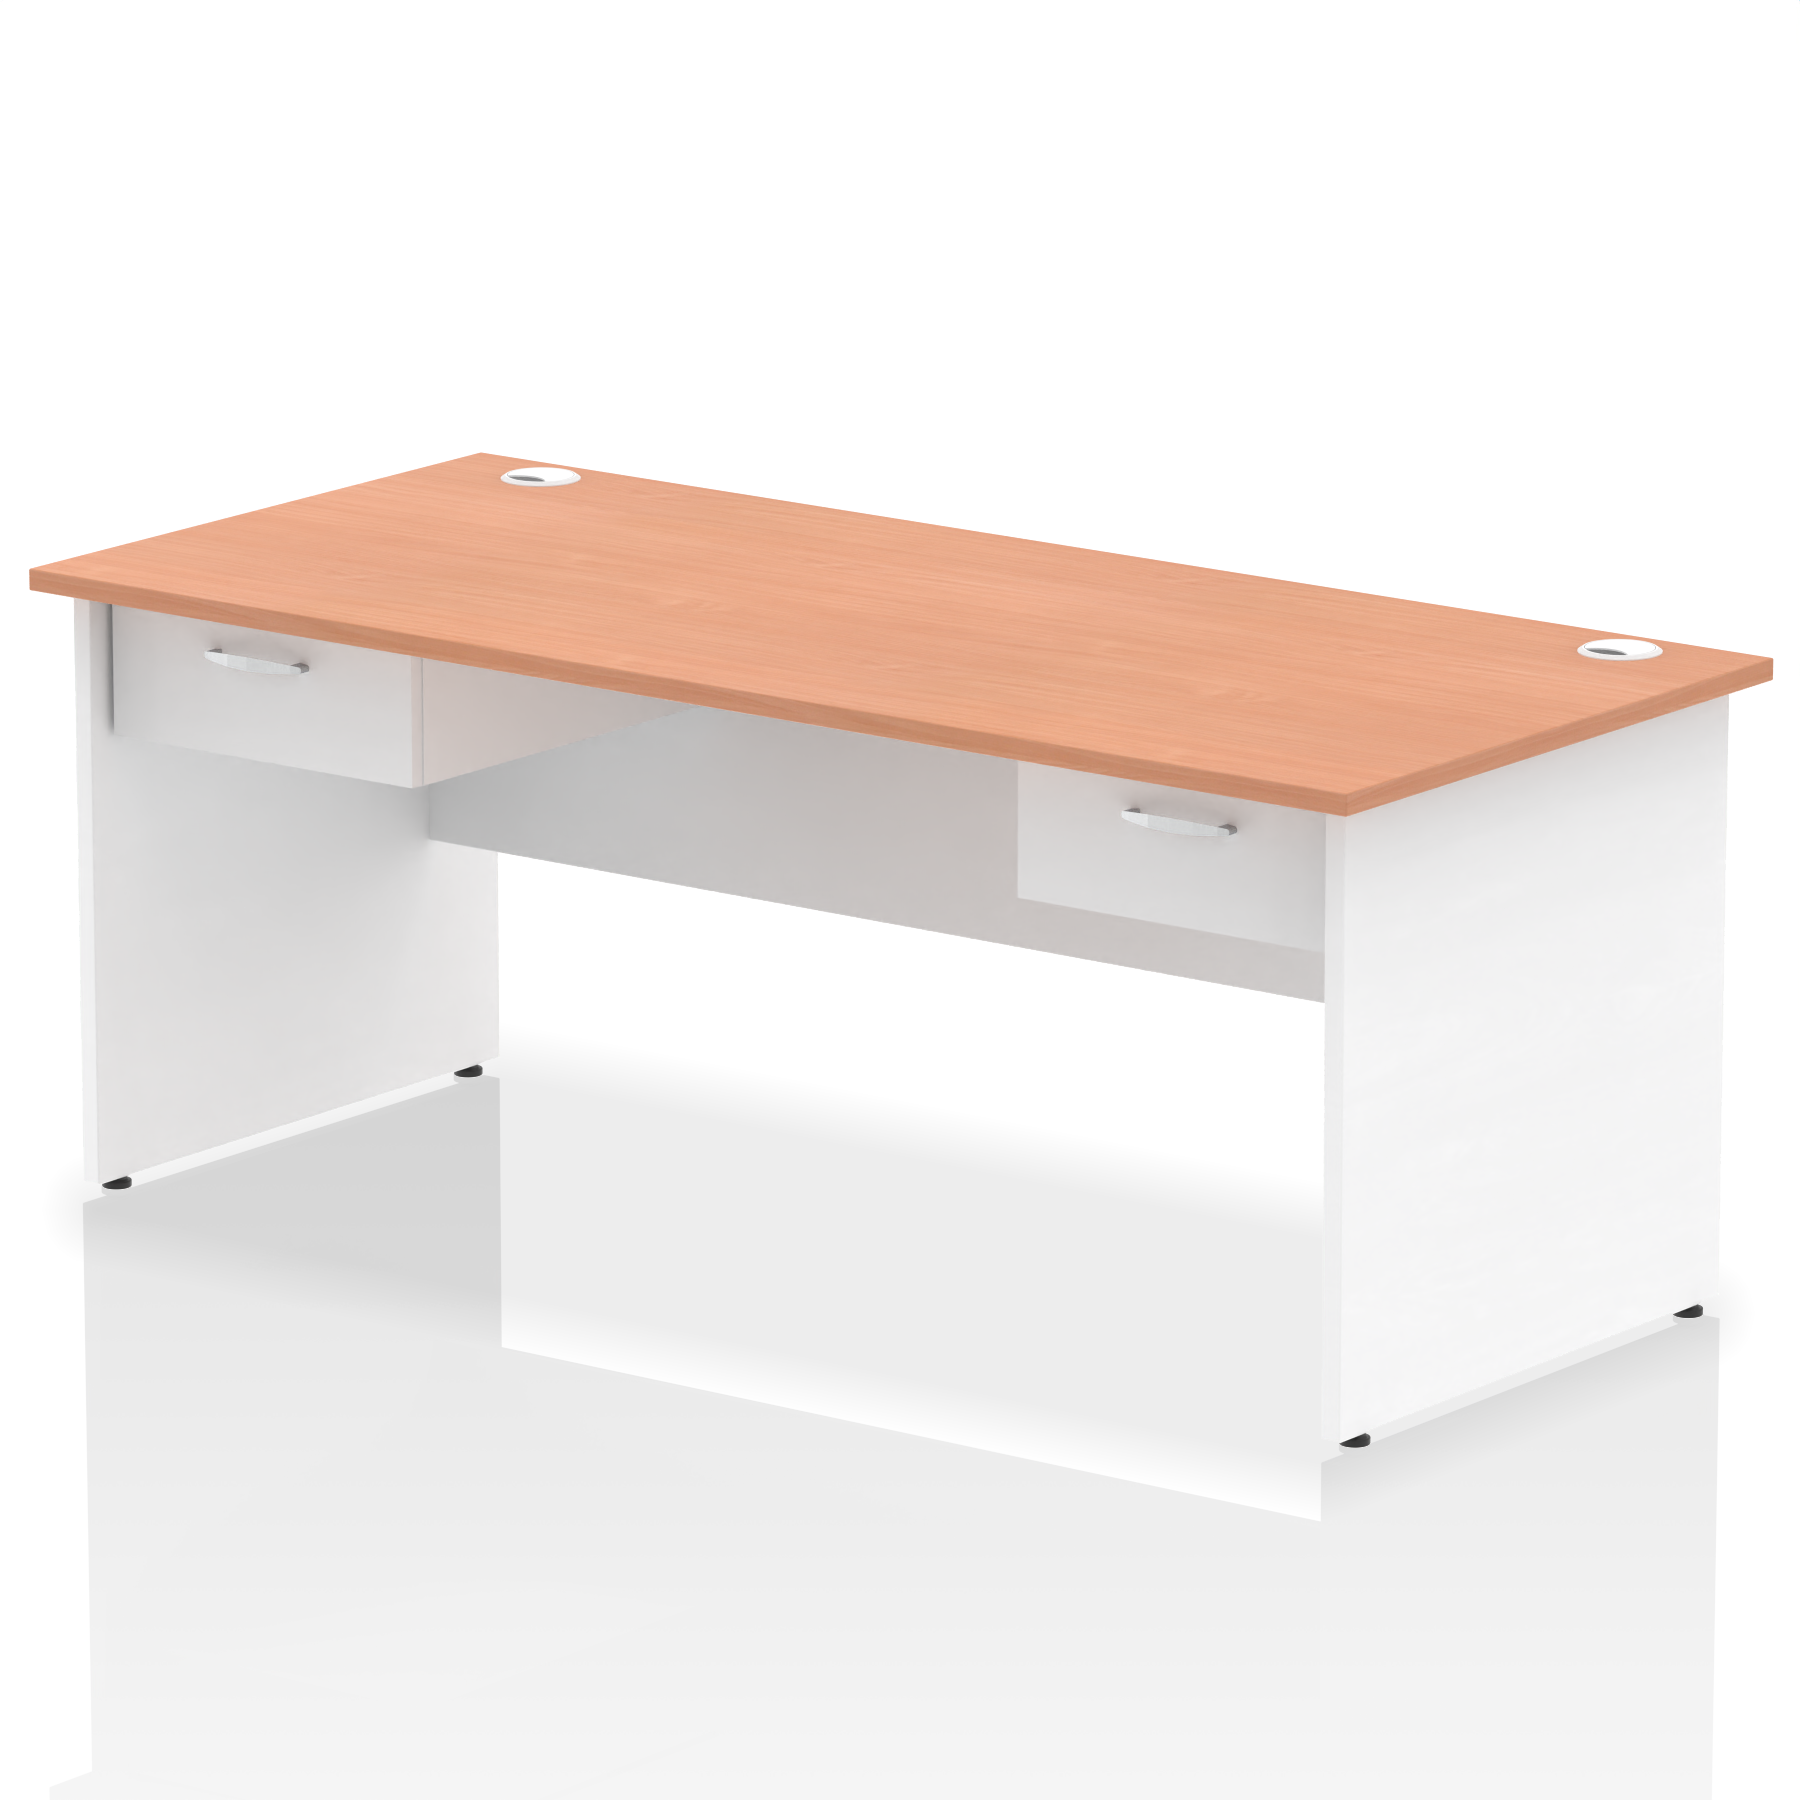 Impulse Panel End Straight Desk Frame With Two One Drawer Fixed Pedestals